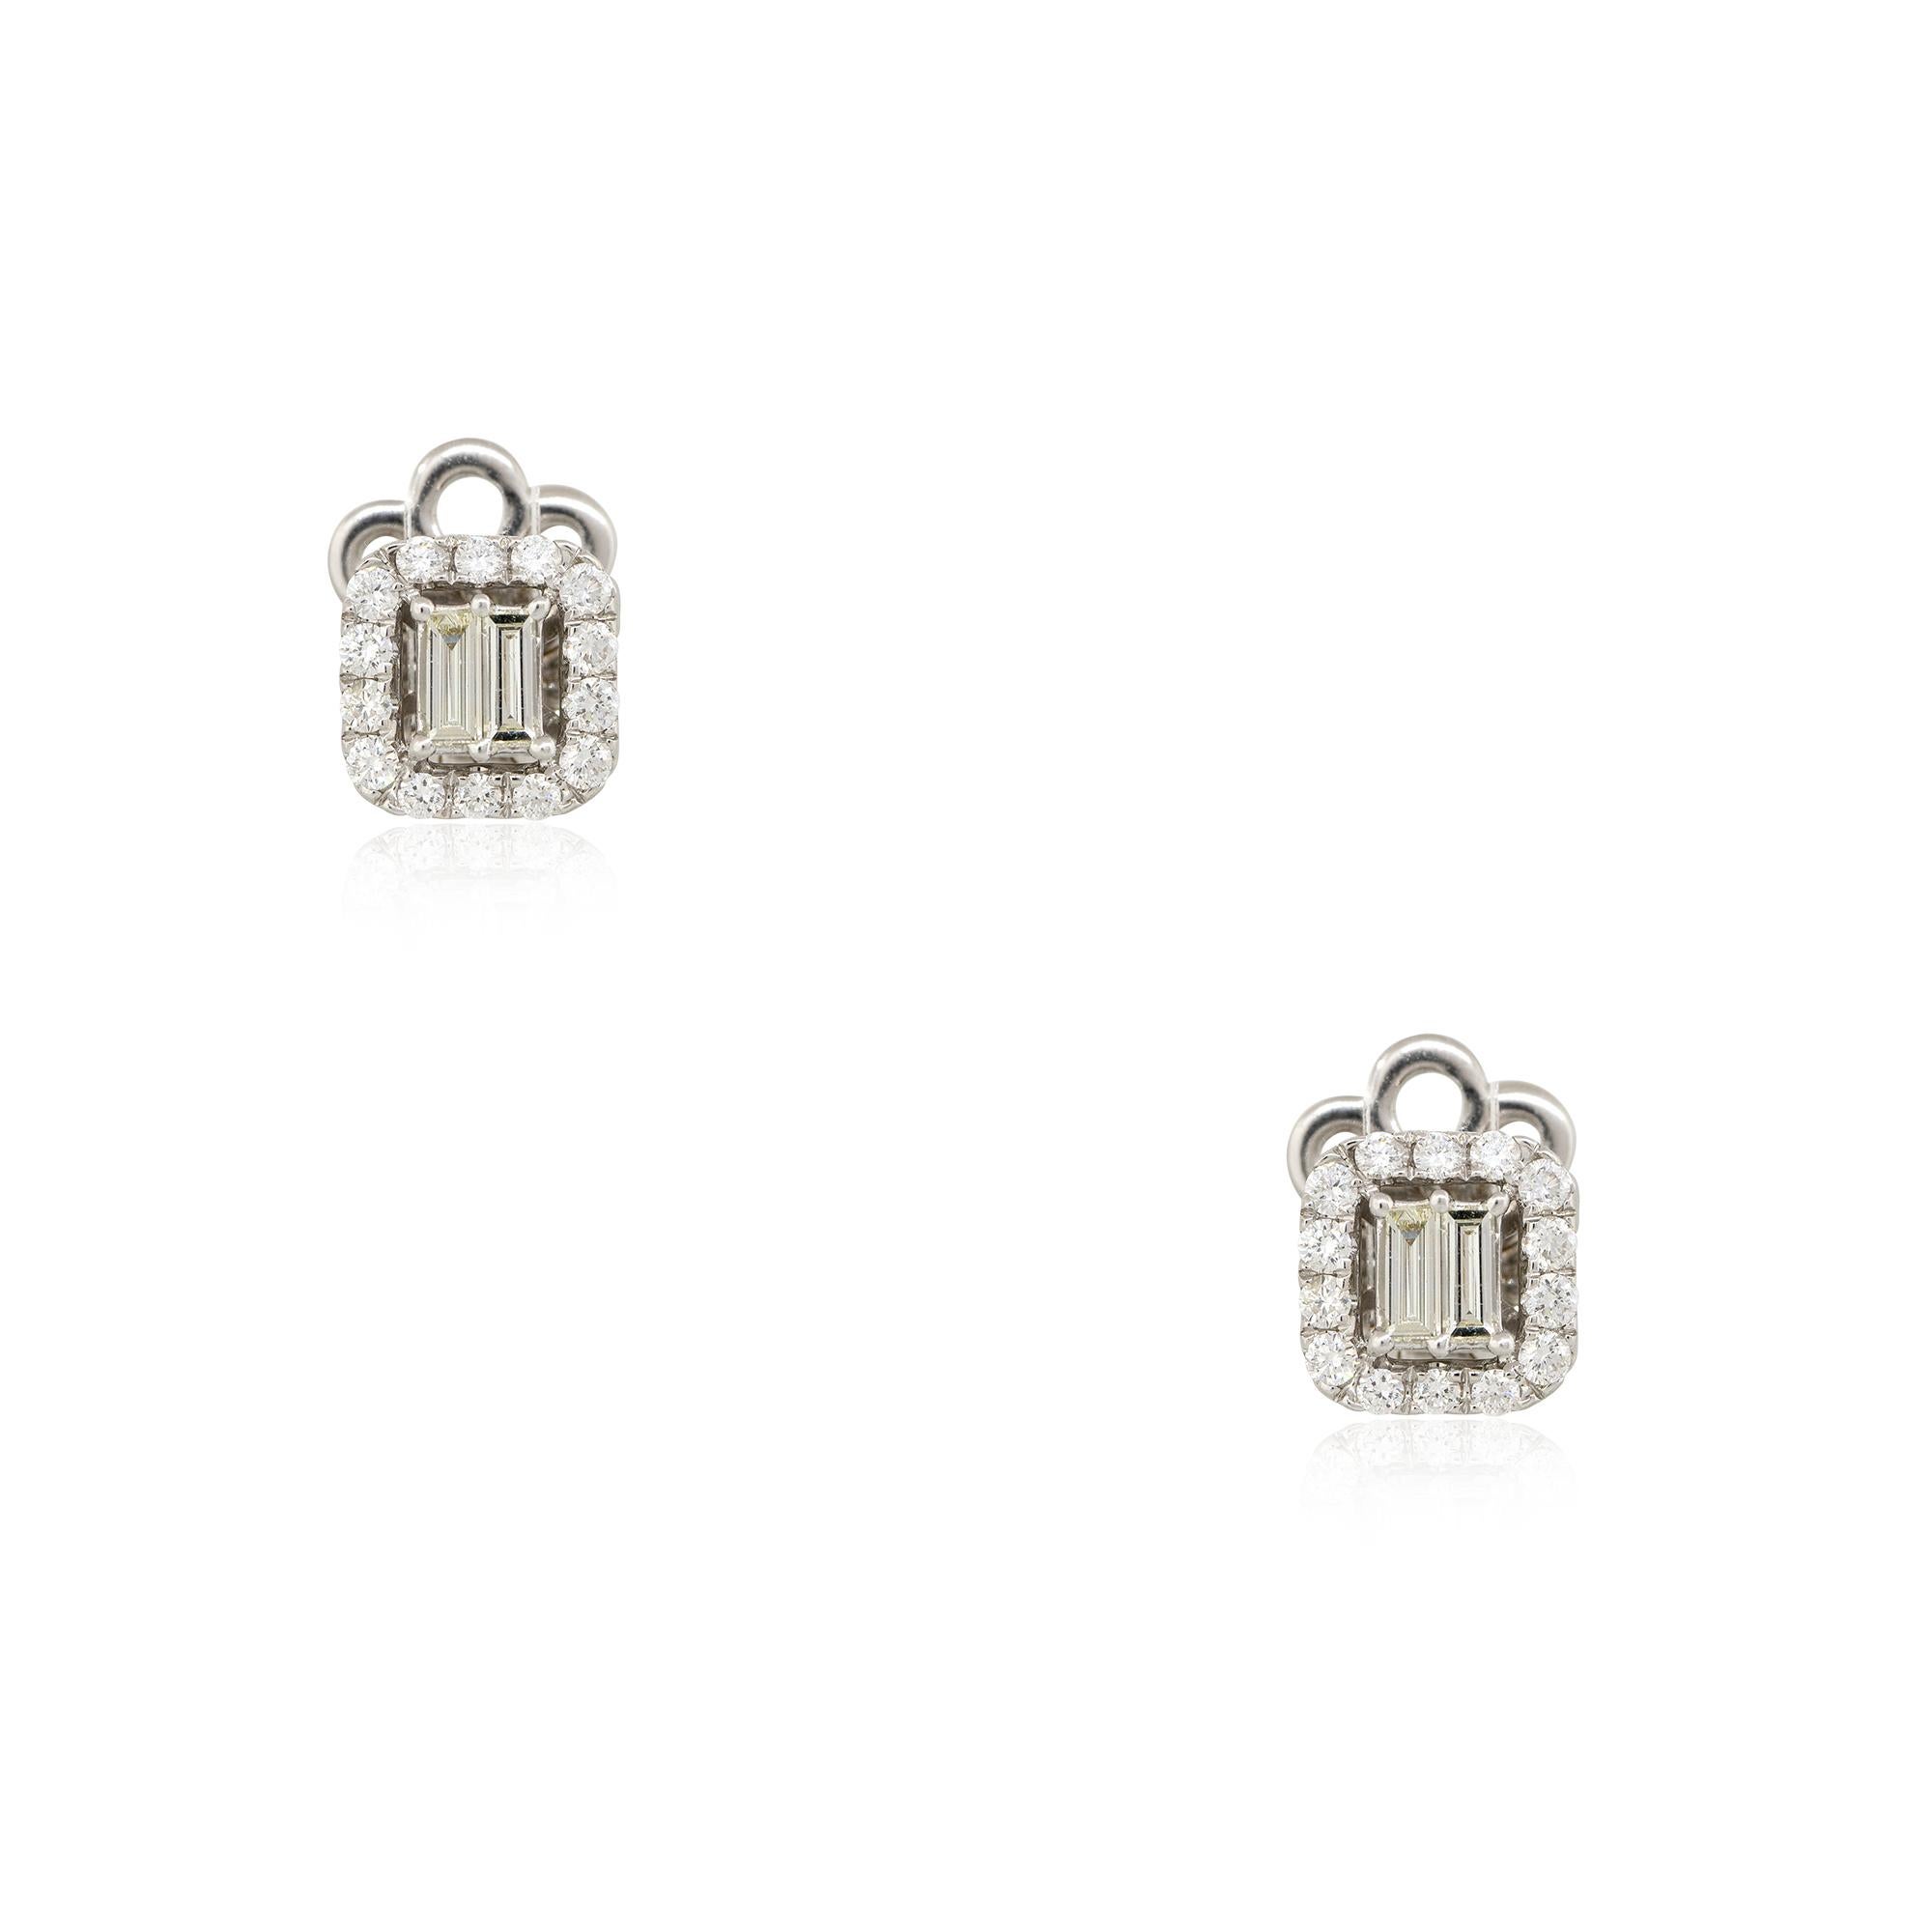 14k White Gold 0.95ct Round Brilliant & Baguette Cut Diamond Square Earrings

Product: Diamond Square Earrings
Material: 14k White Gold
Diamond Details: There are approximately 0.95 carats of round brilliant and baguette-cut diamonds
Diamond